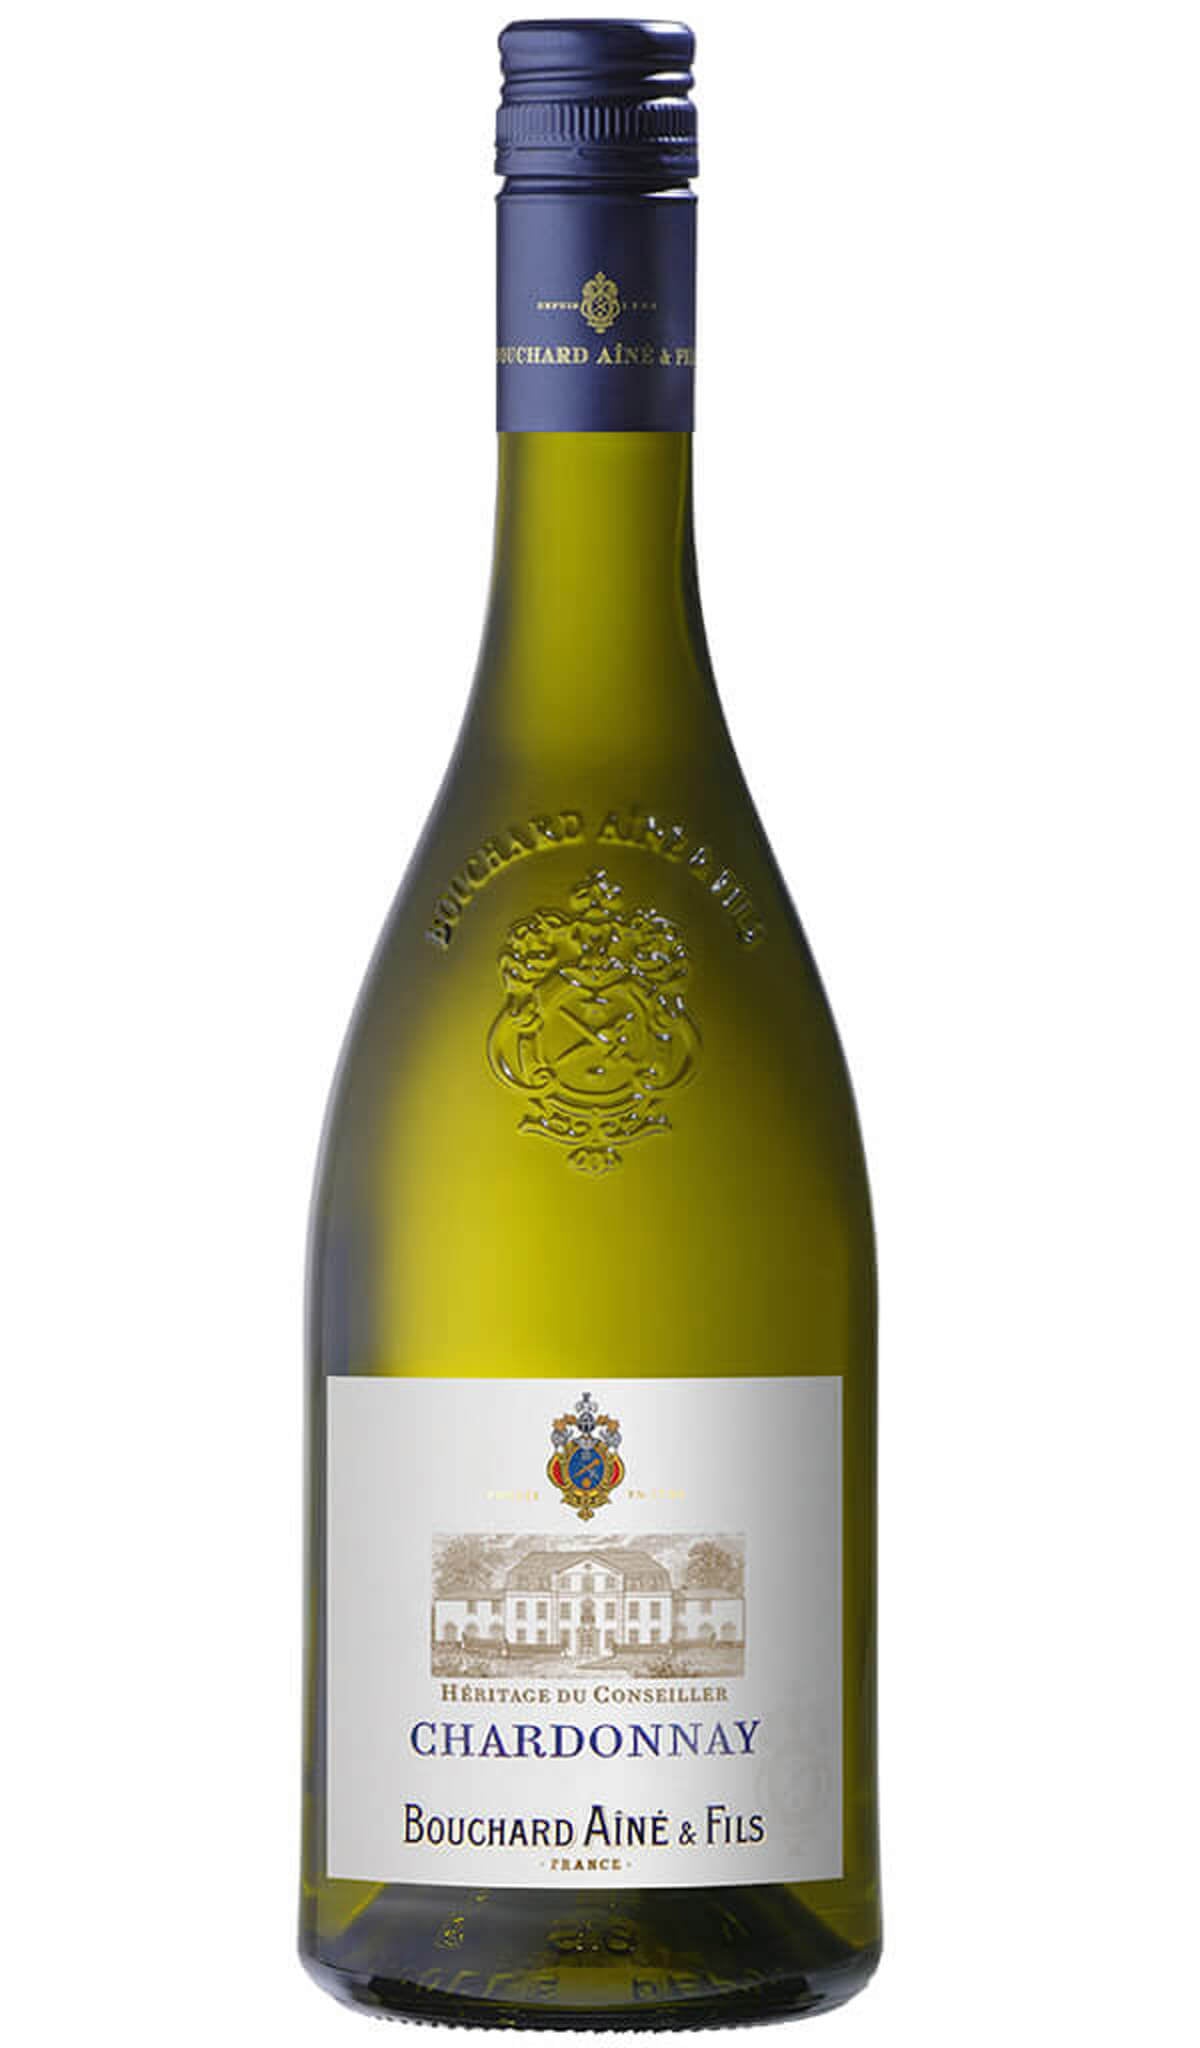 Find out more or buy Bouchard Aine & Fils 'Heritage du Conseiller' Chardonnay 2022 online at Wine Sellers Direct - Australia’s independent liquor specialists.